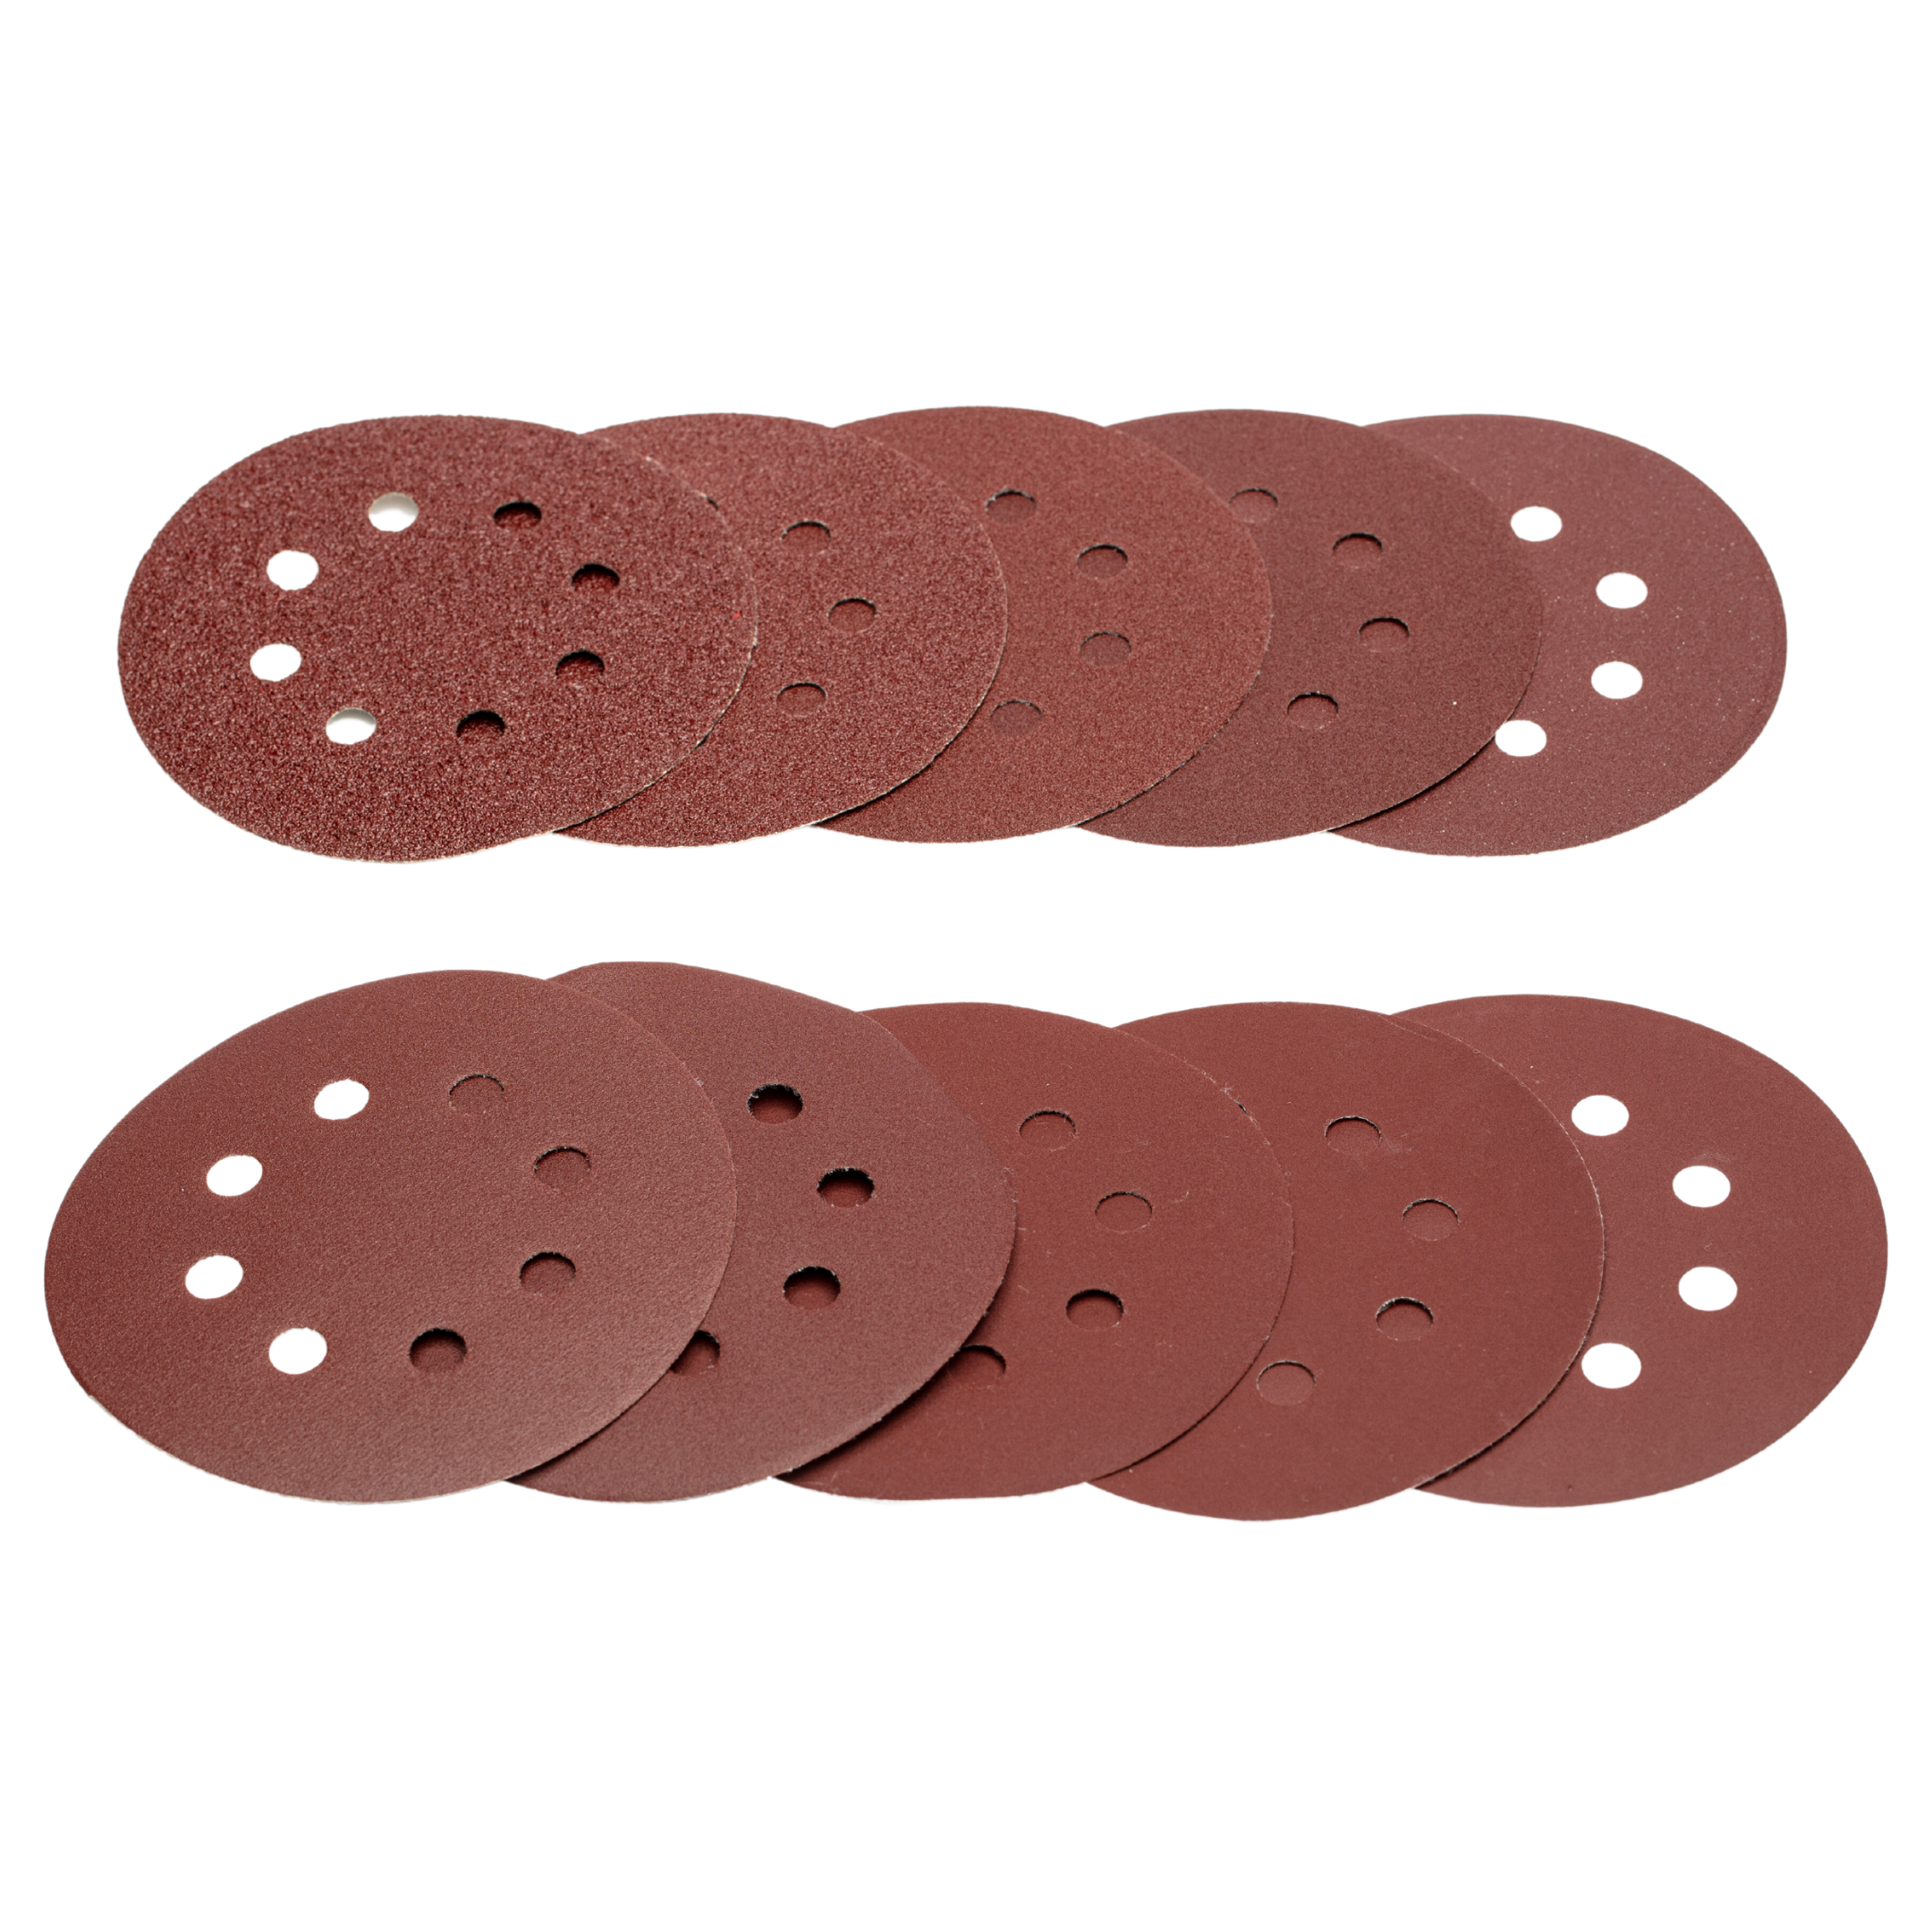 5-inch 8 Hole Hook-and-Loop Sanding Discs - Value Pack, 100 PCS – Starbond